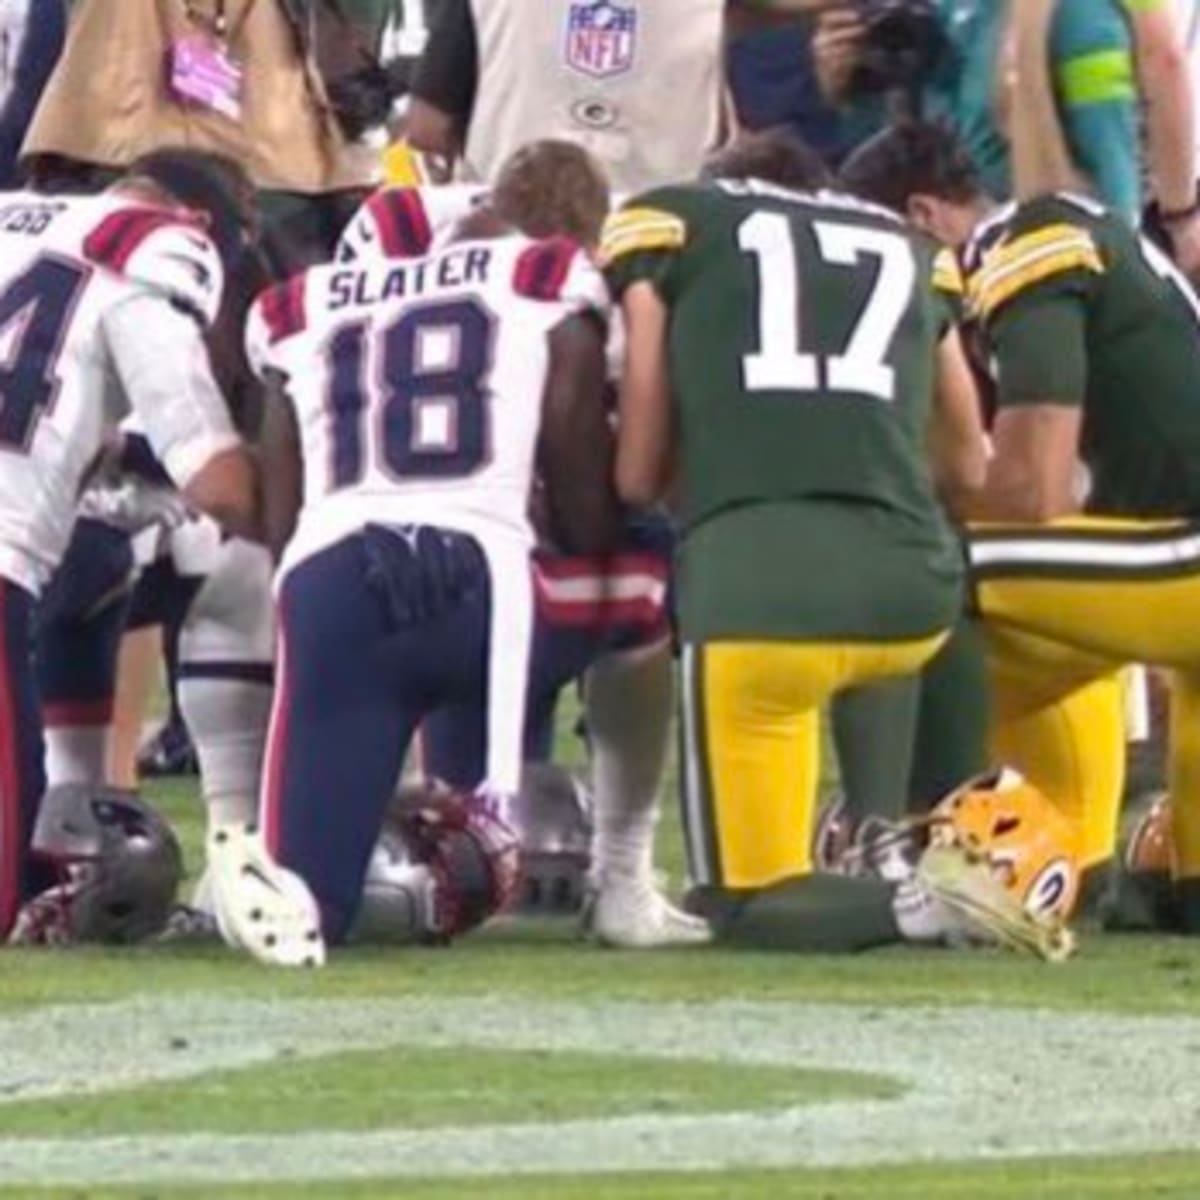 Bolden injury: Patriots-Packers game suspended – NBC Boston